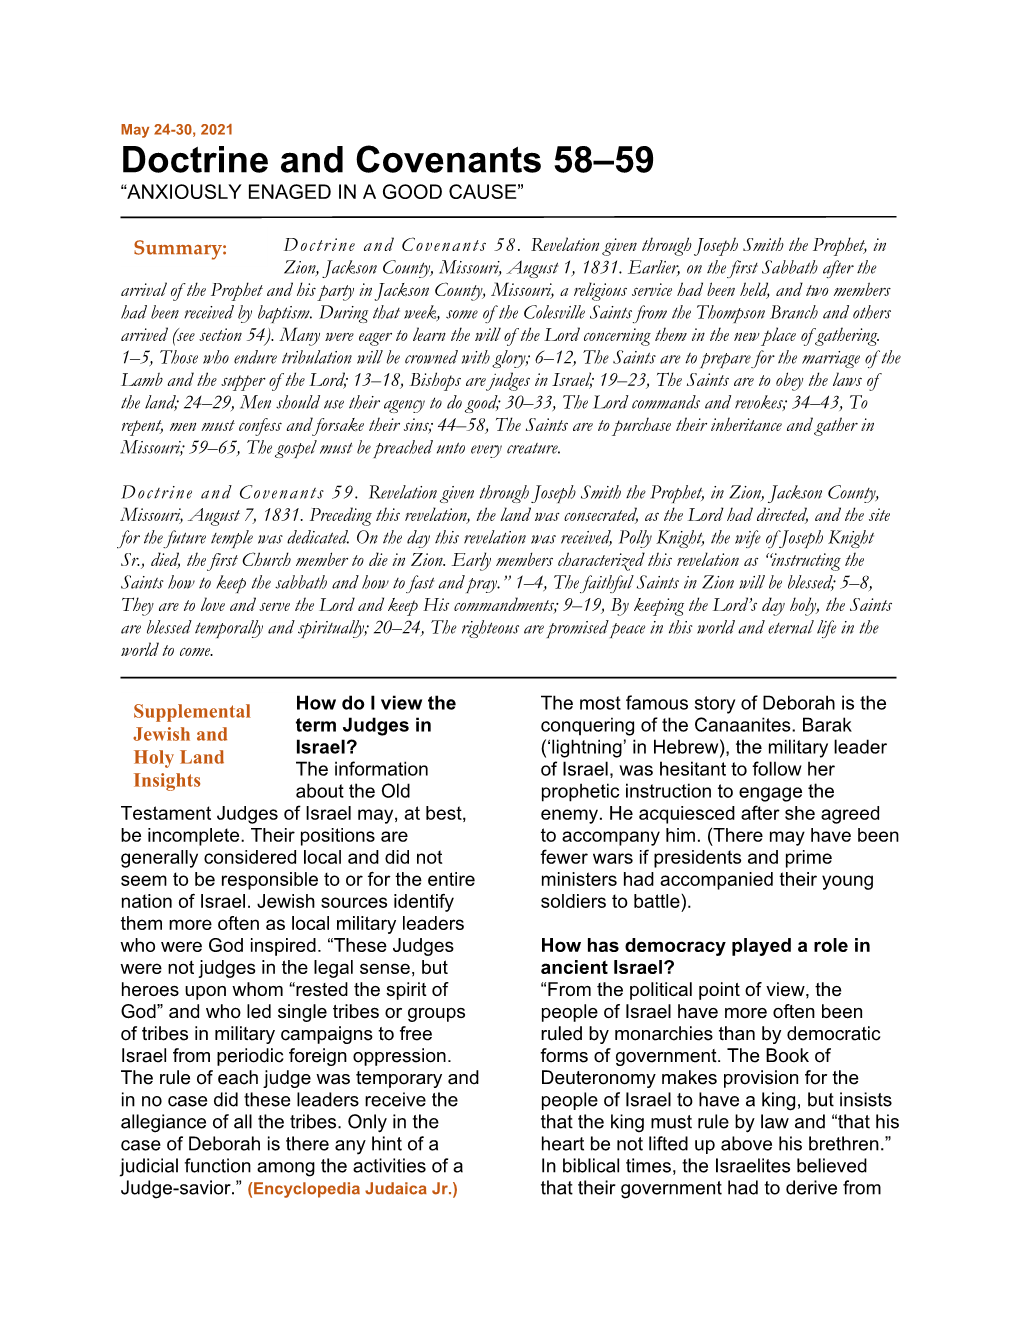 Doctrine and Covenants 58–59 “ANXIOUSLY ENAGED in a GOOD CAUSE”